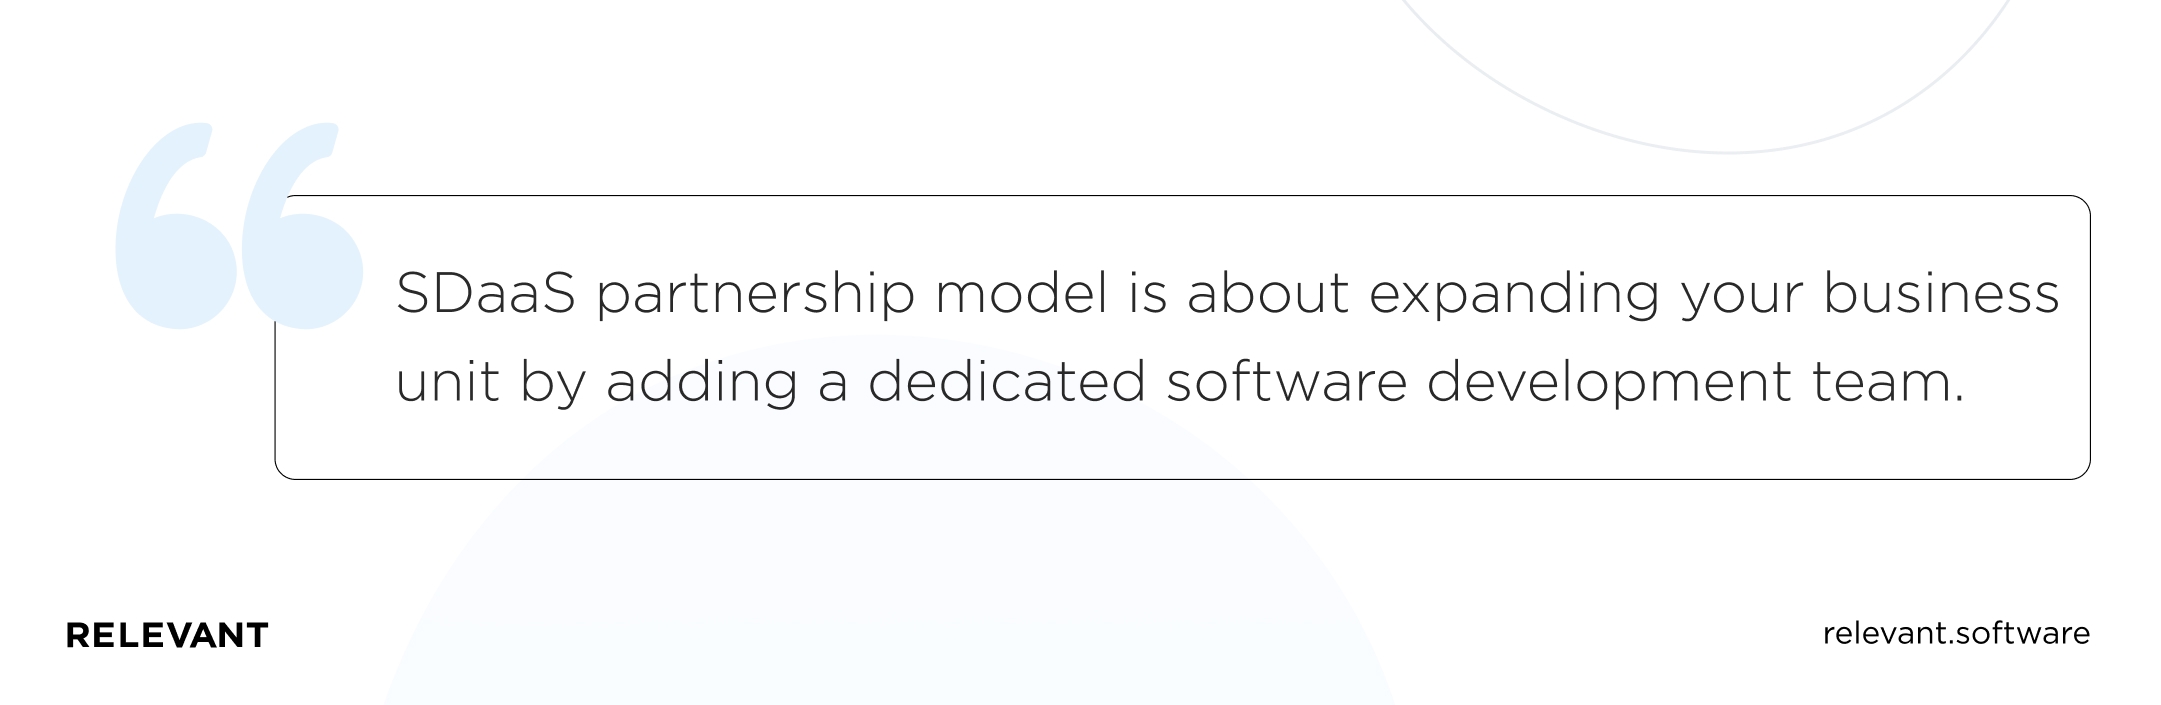 SDaaS partnership model is about expanding your business unit by adding a dedicated software development team